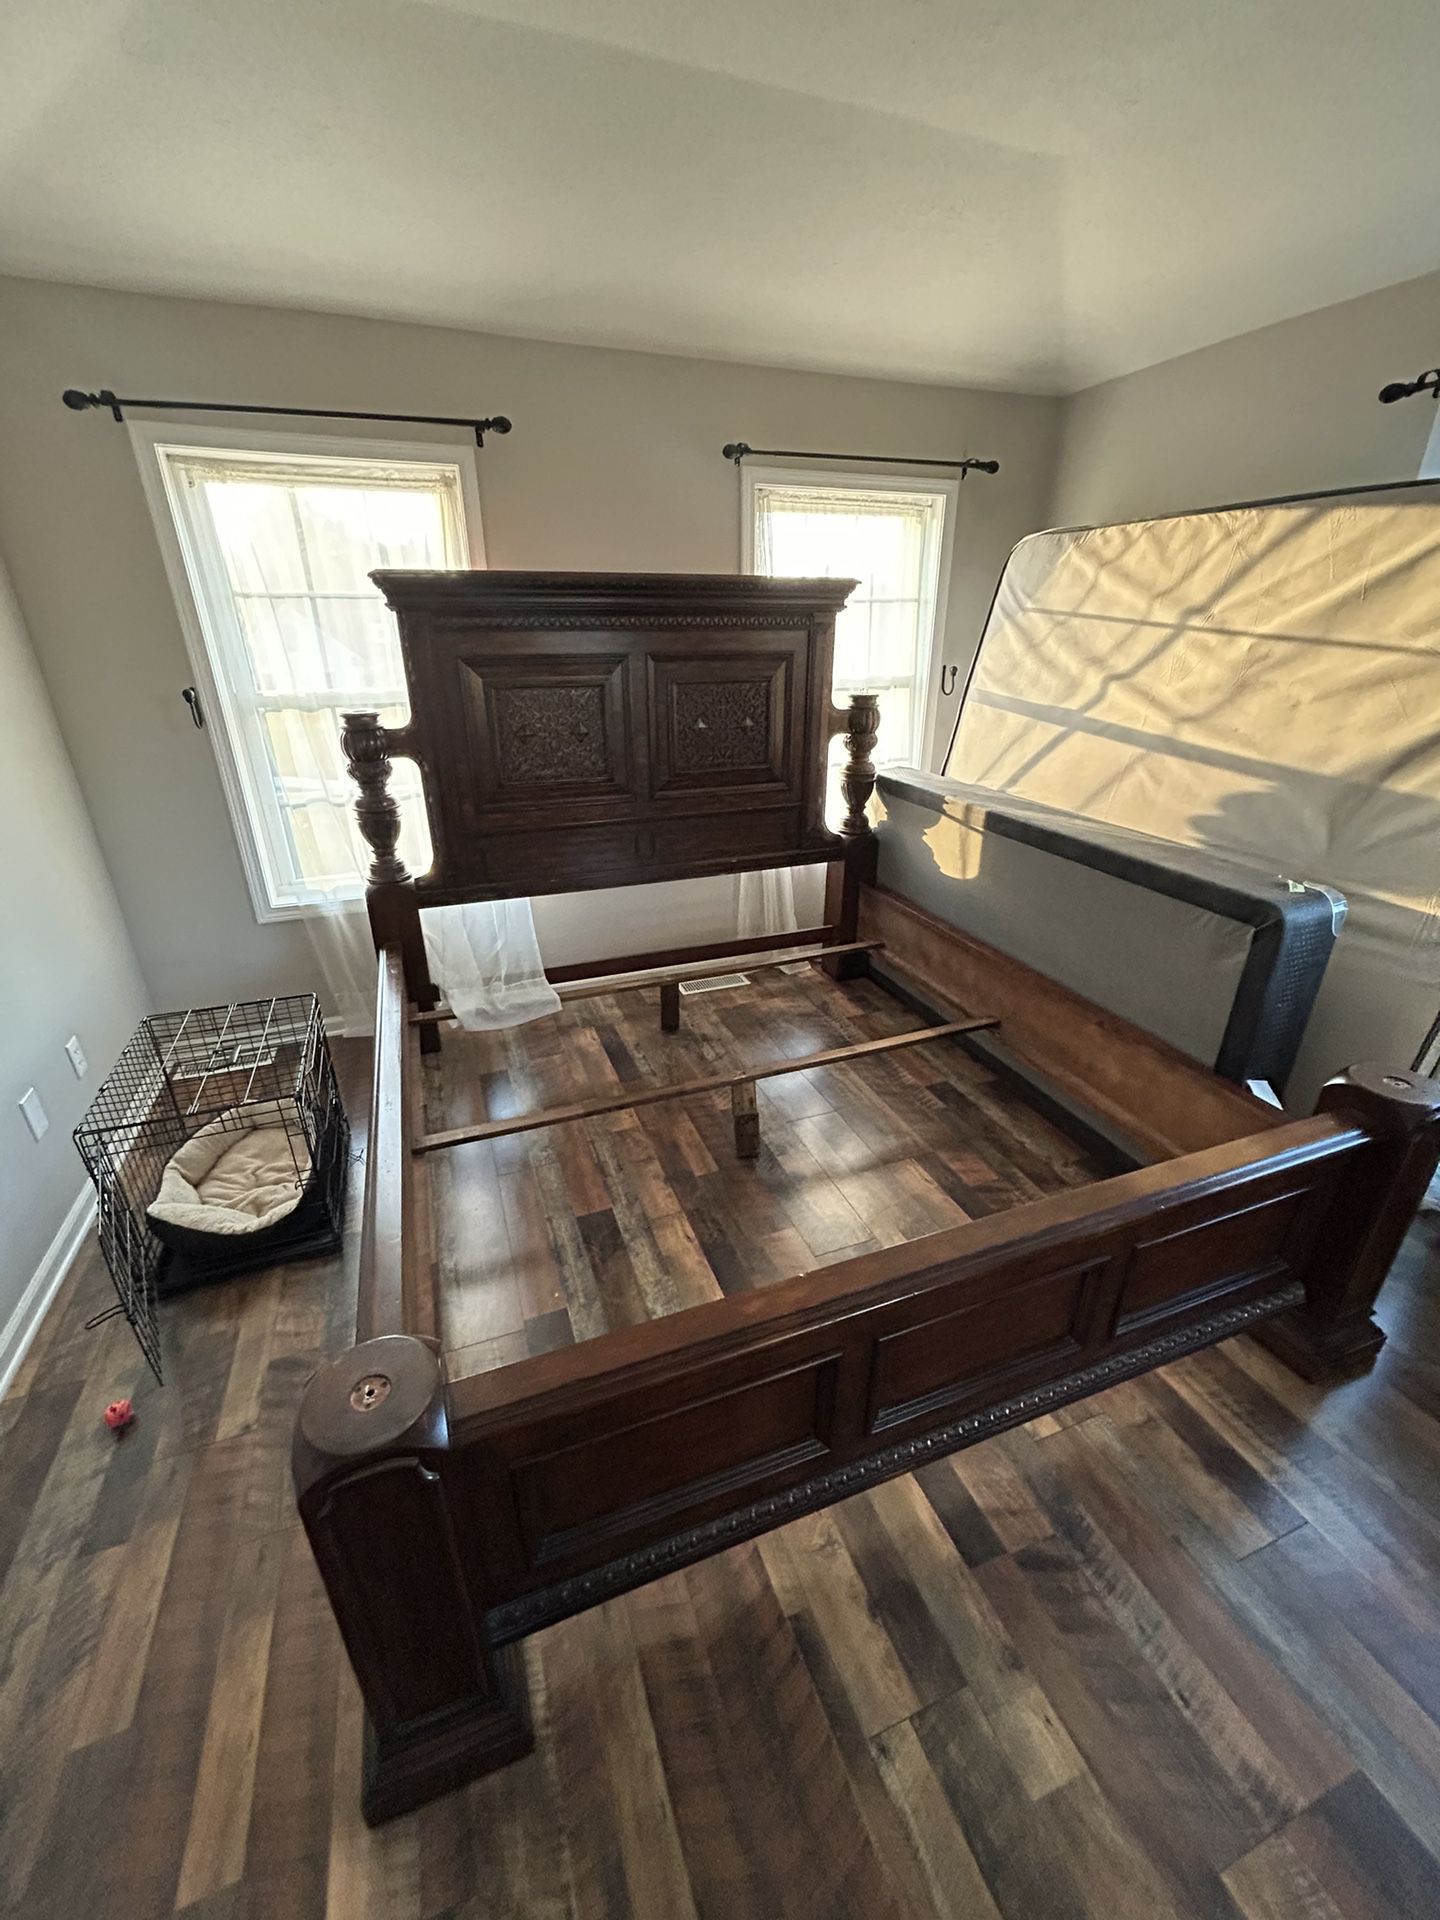 King/Queen size wooden bed frame